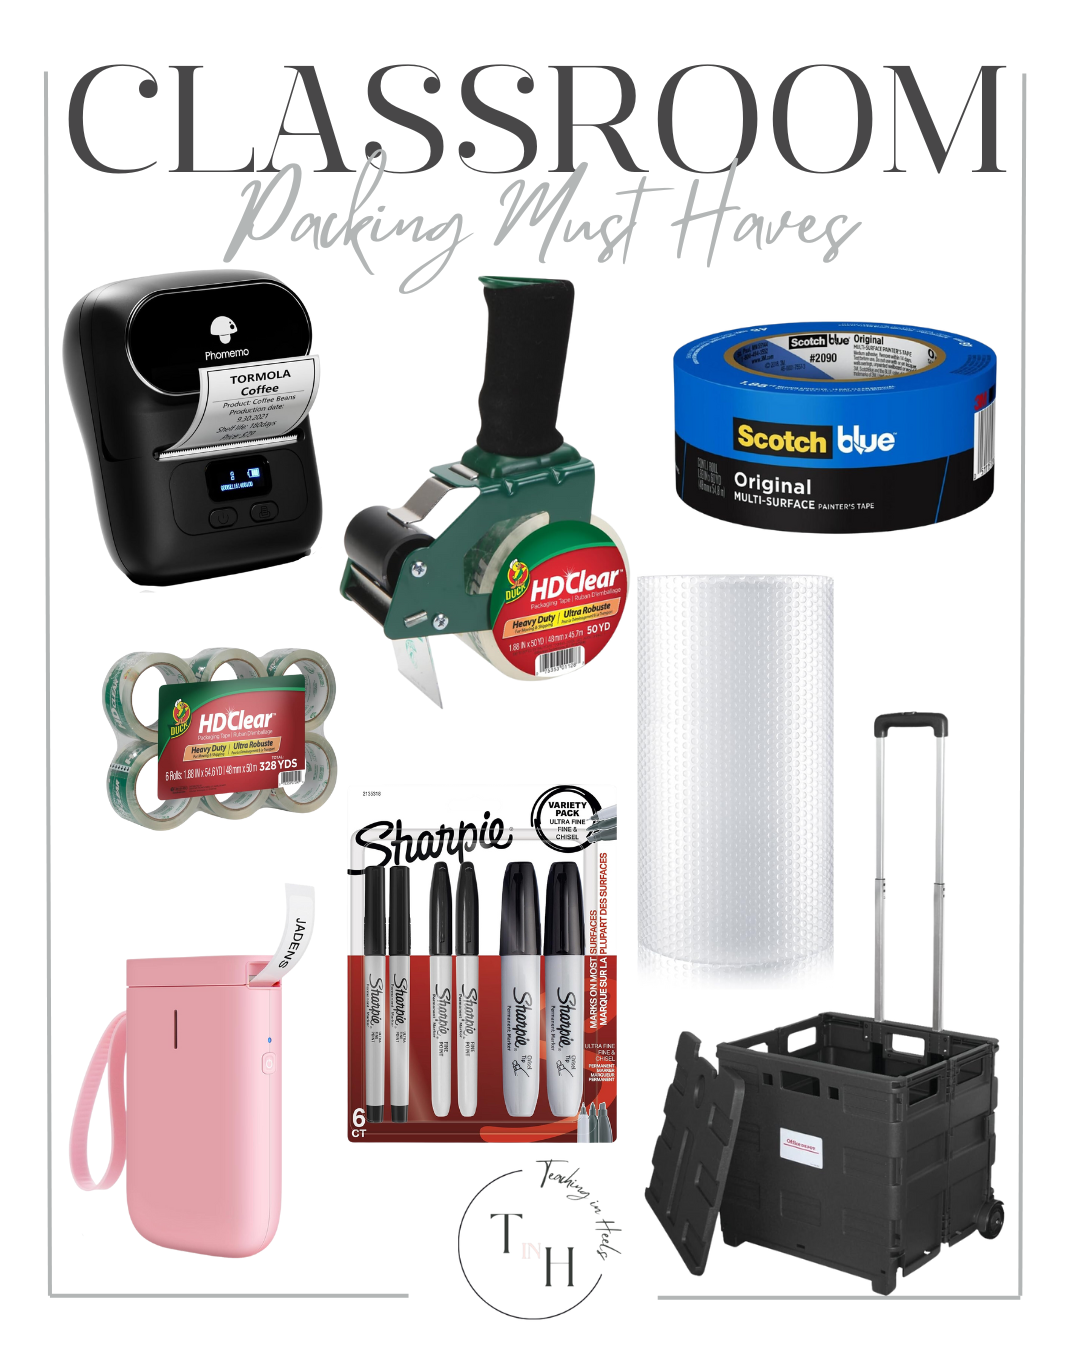 Packing Up Your Classroom: Steps for Stress-Free End-of-Year Organization

packing essentials, storage essentials, packing classroom, classroom essentials, teacher, end of year classroom